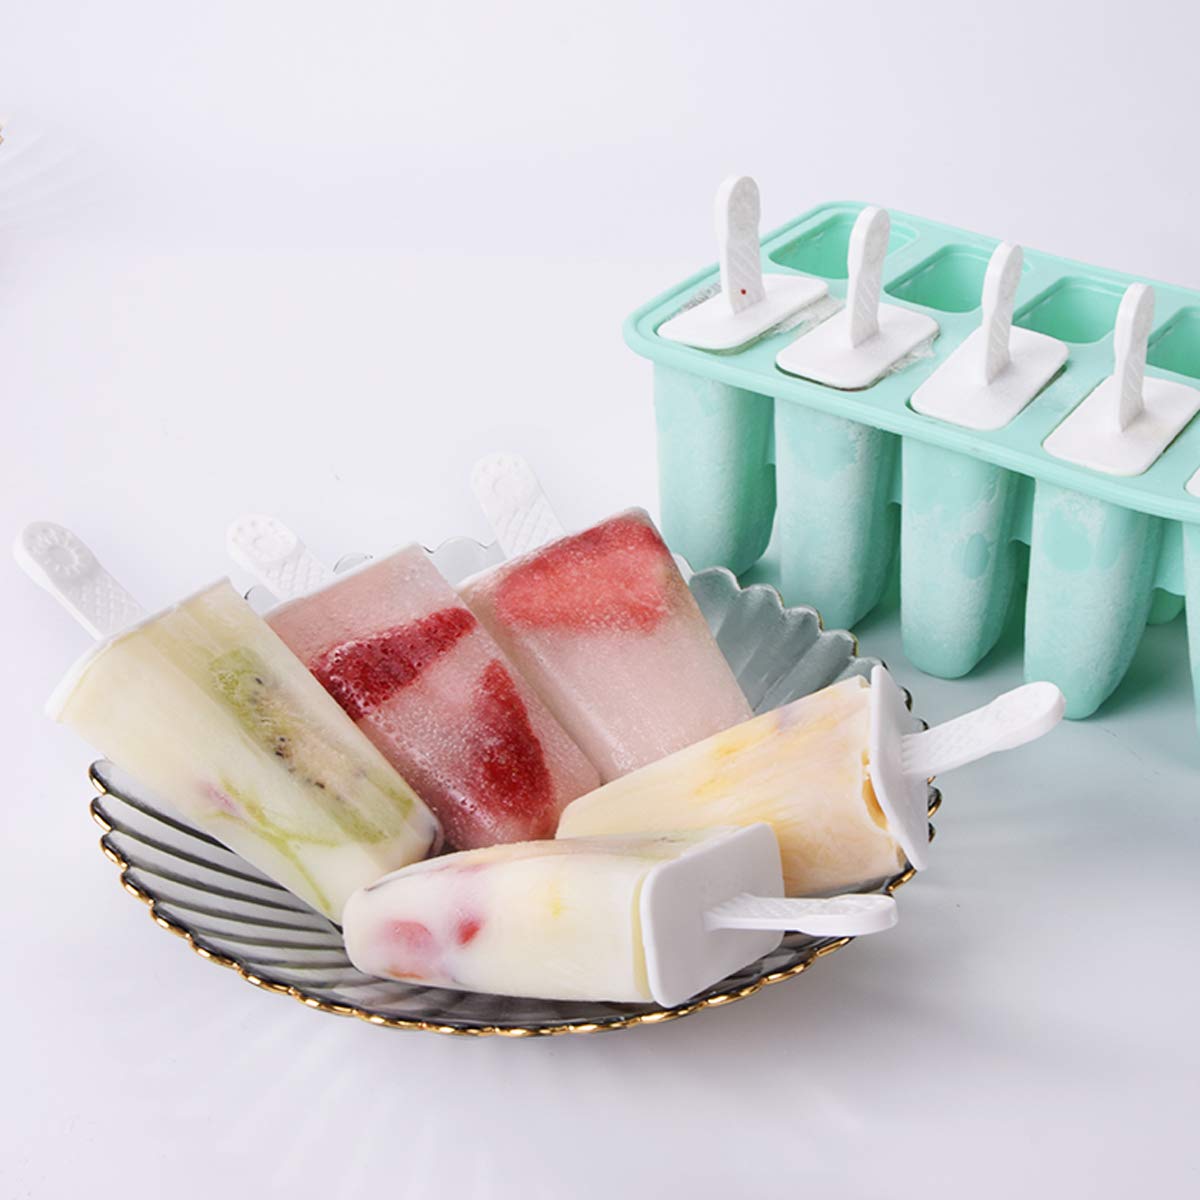 YSBER Popsicle Molds -10 Pieces Easy Release - Reusable BPA Free Silicone Ice Pop Molds Maker With Silicone Funnel & Cleaning Brush.